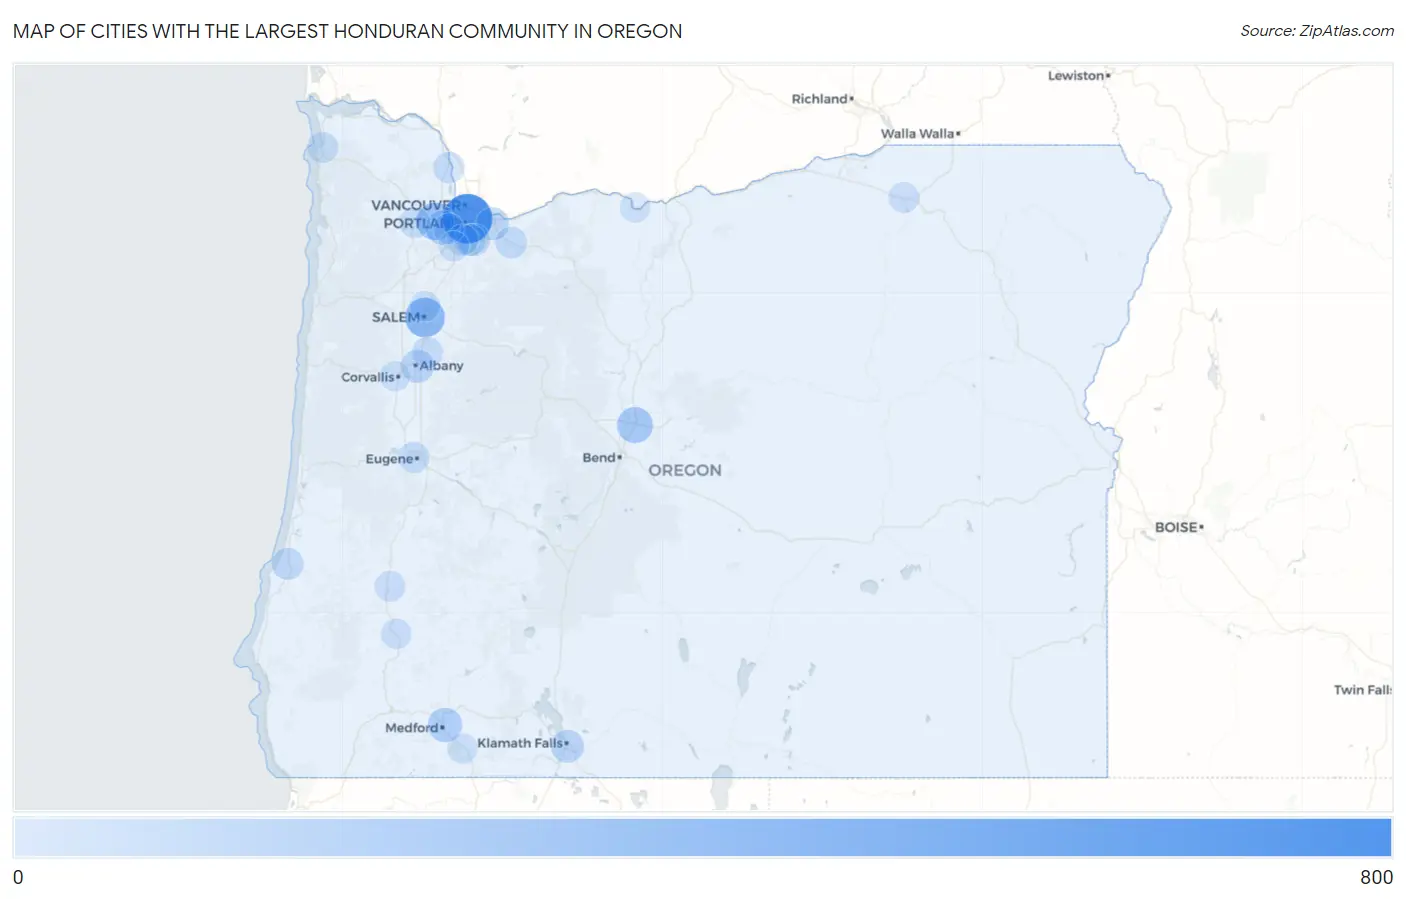 Cities with the Largest Honduran Community in Oregon Map